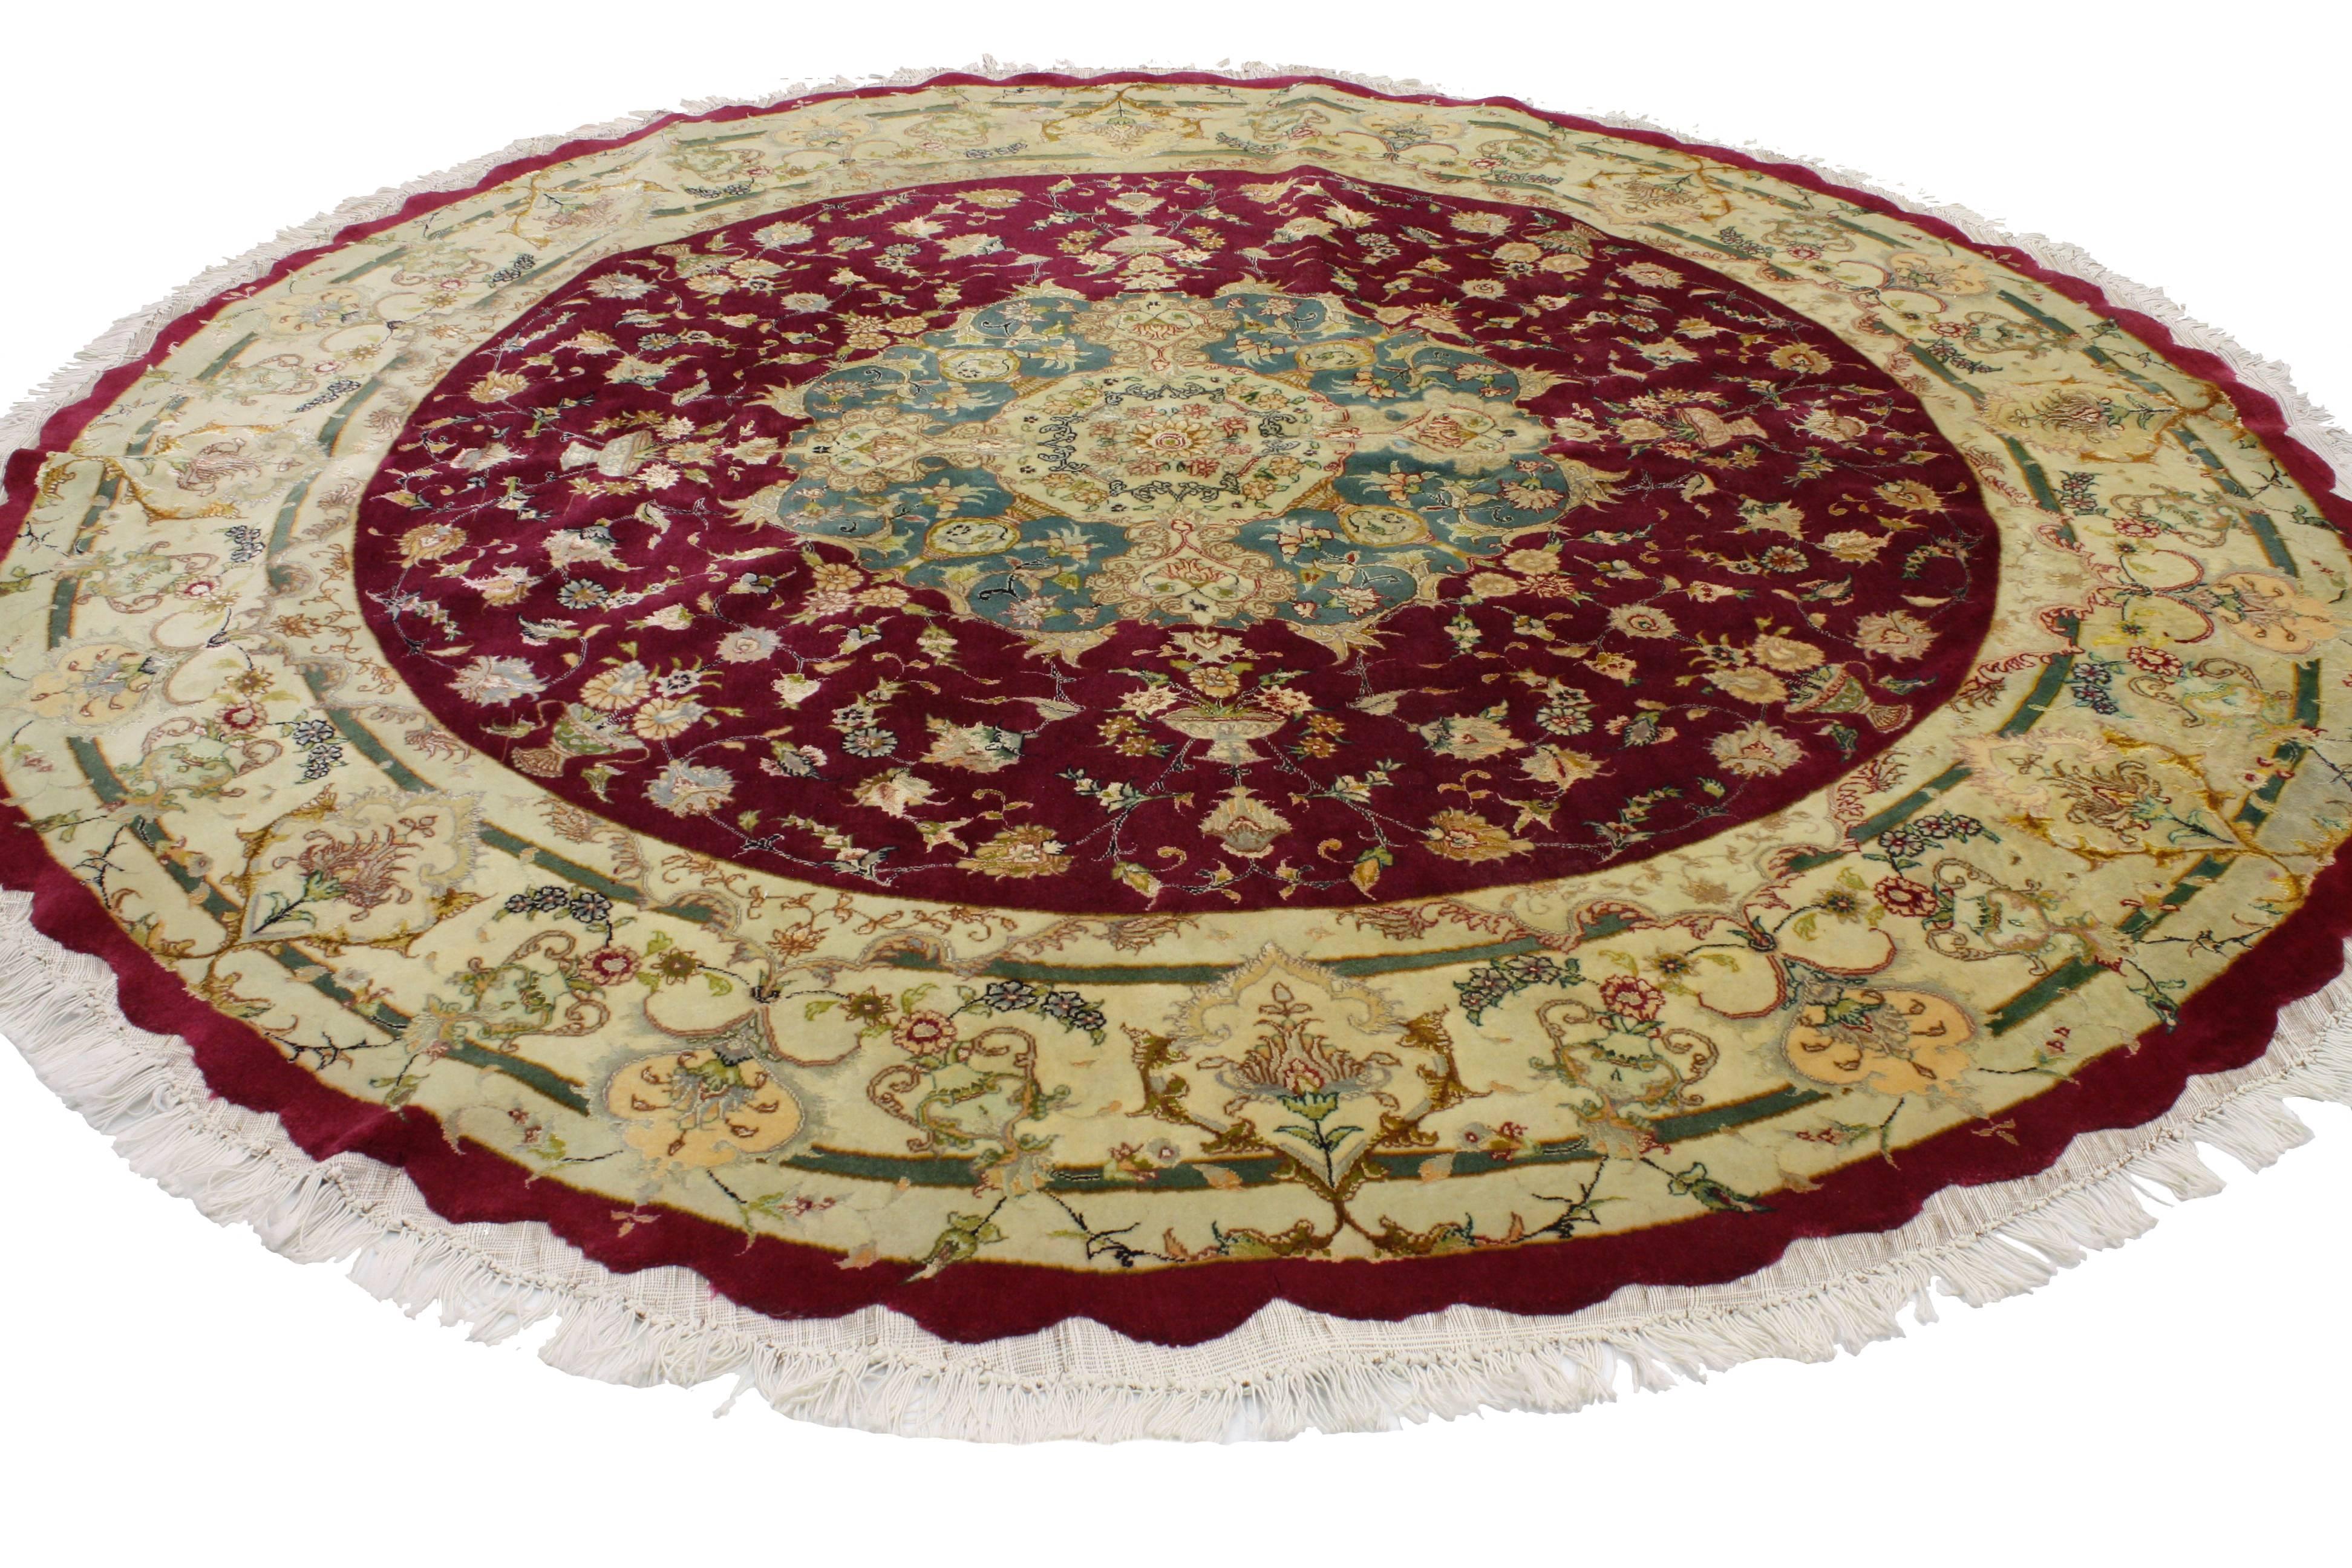 Timeless and refined, this round Persian Tabriz rug features traditional style. Taking center stage is an ornate medallion floating in a burgundy field. The medallion is surround by all-over florals abundantly flowing from Persian vases. A